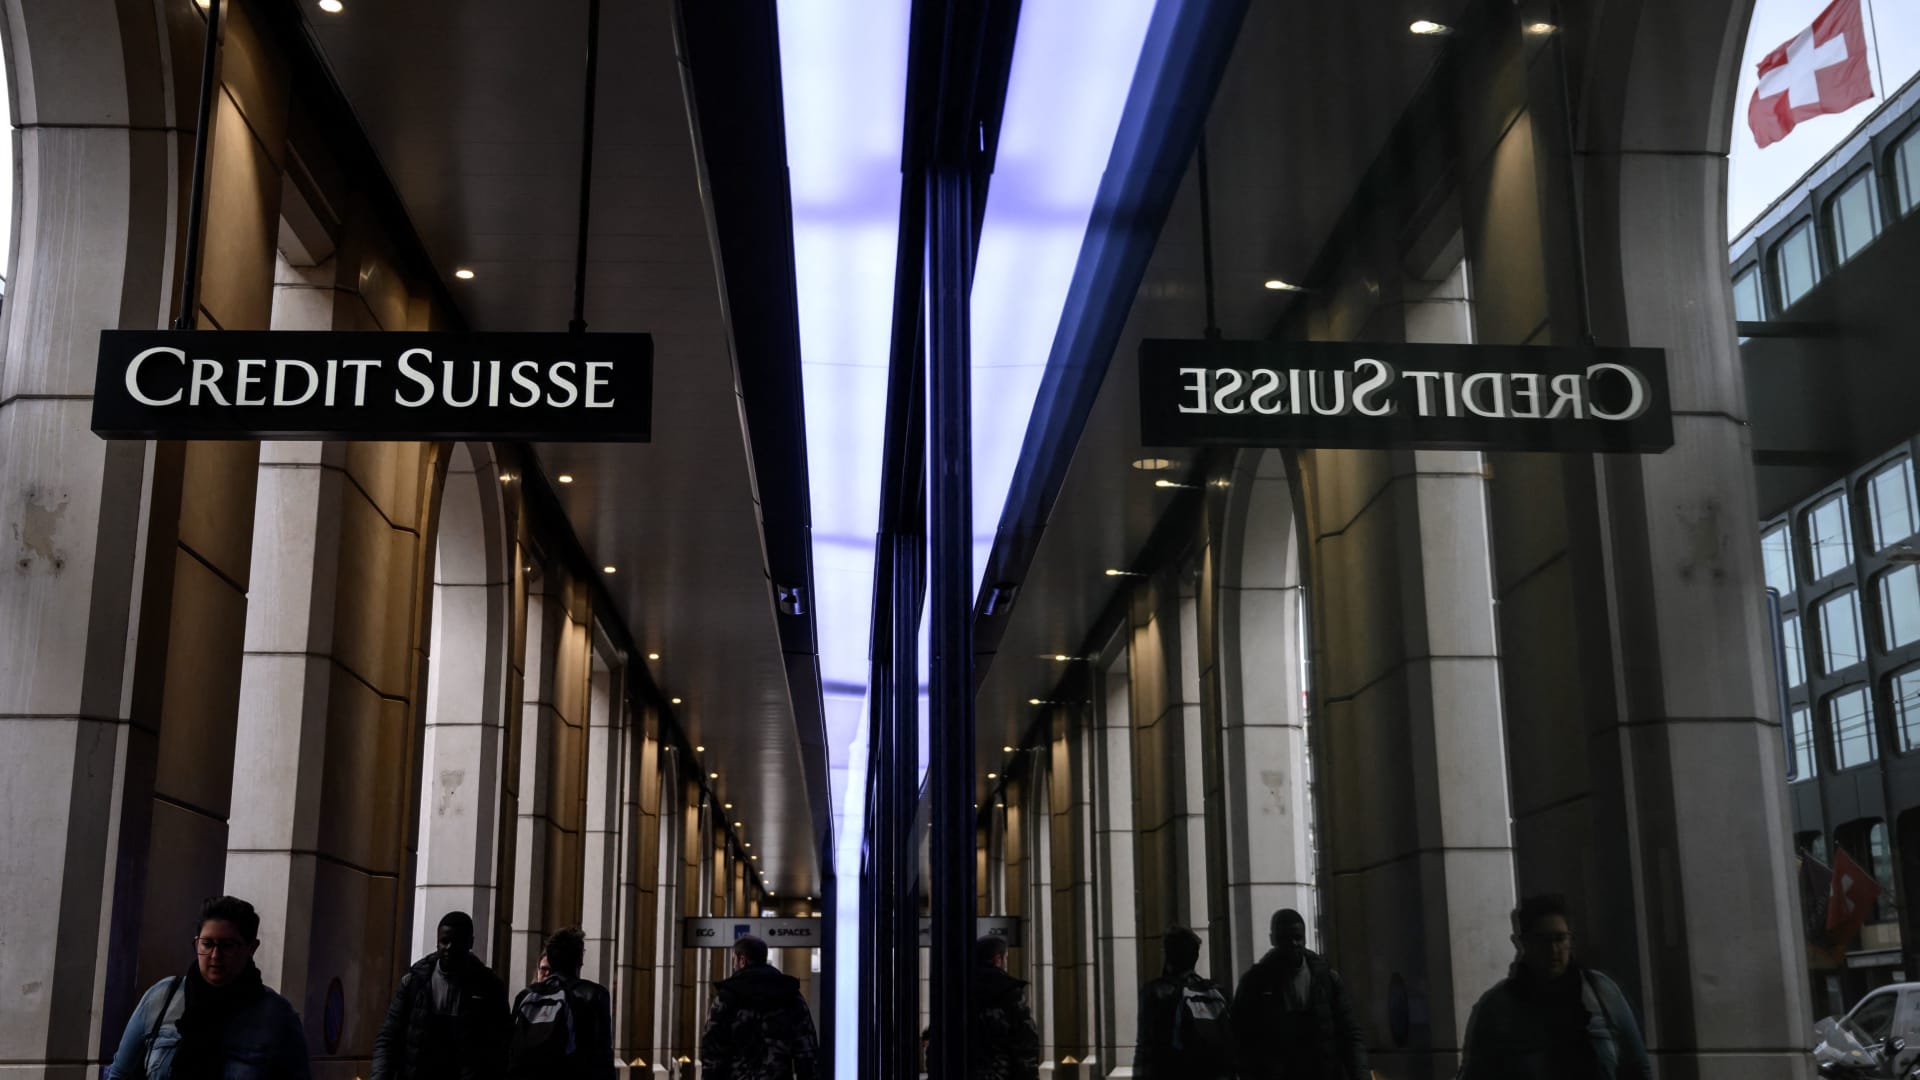 Credit Suisse is under pressure, but short sellers appear to be eyeing another global bank - CNBC